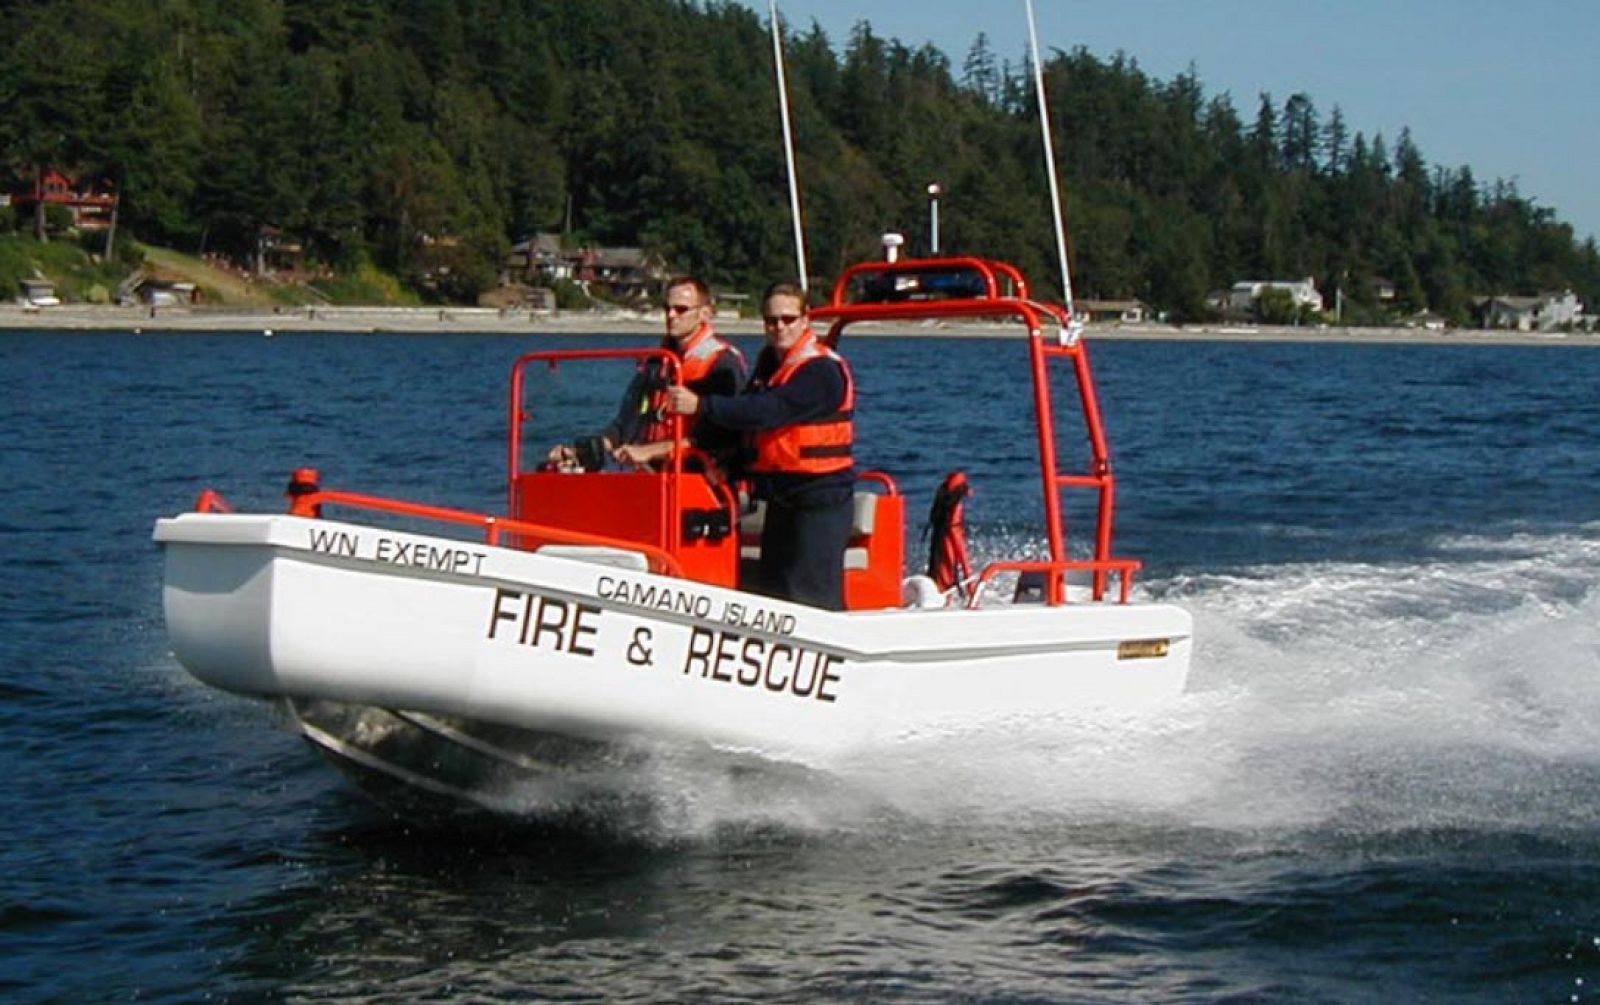 Fire and rescue utility boat